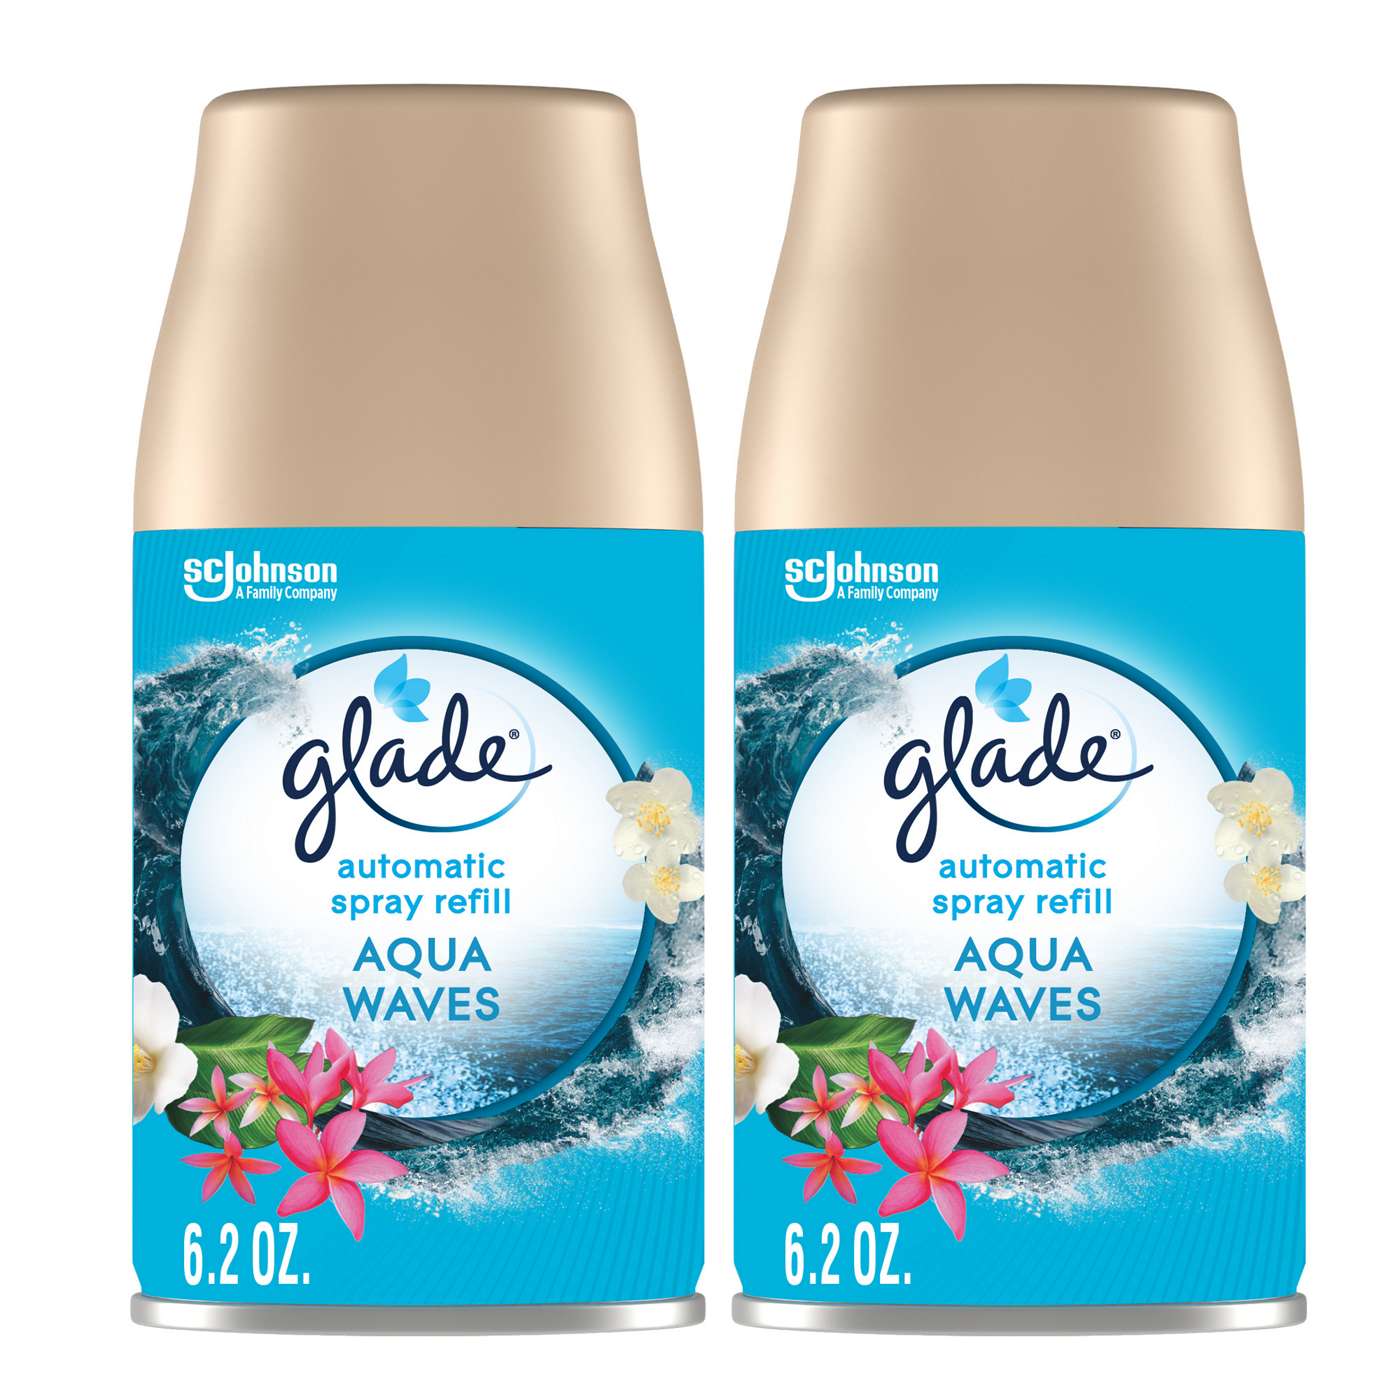 Glade Automatic Spray Refill, Value Pack - Aqua Waves; image 1 of 3